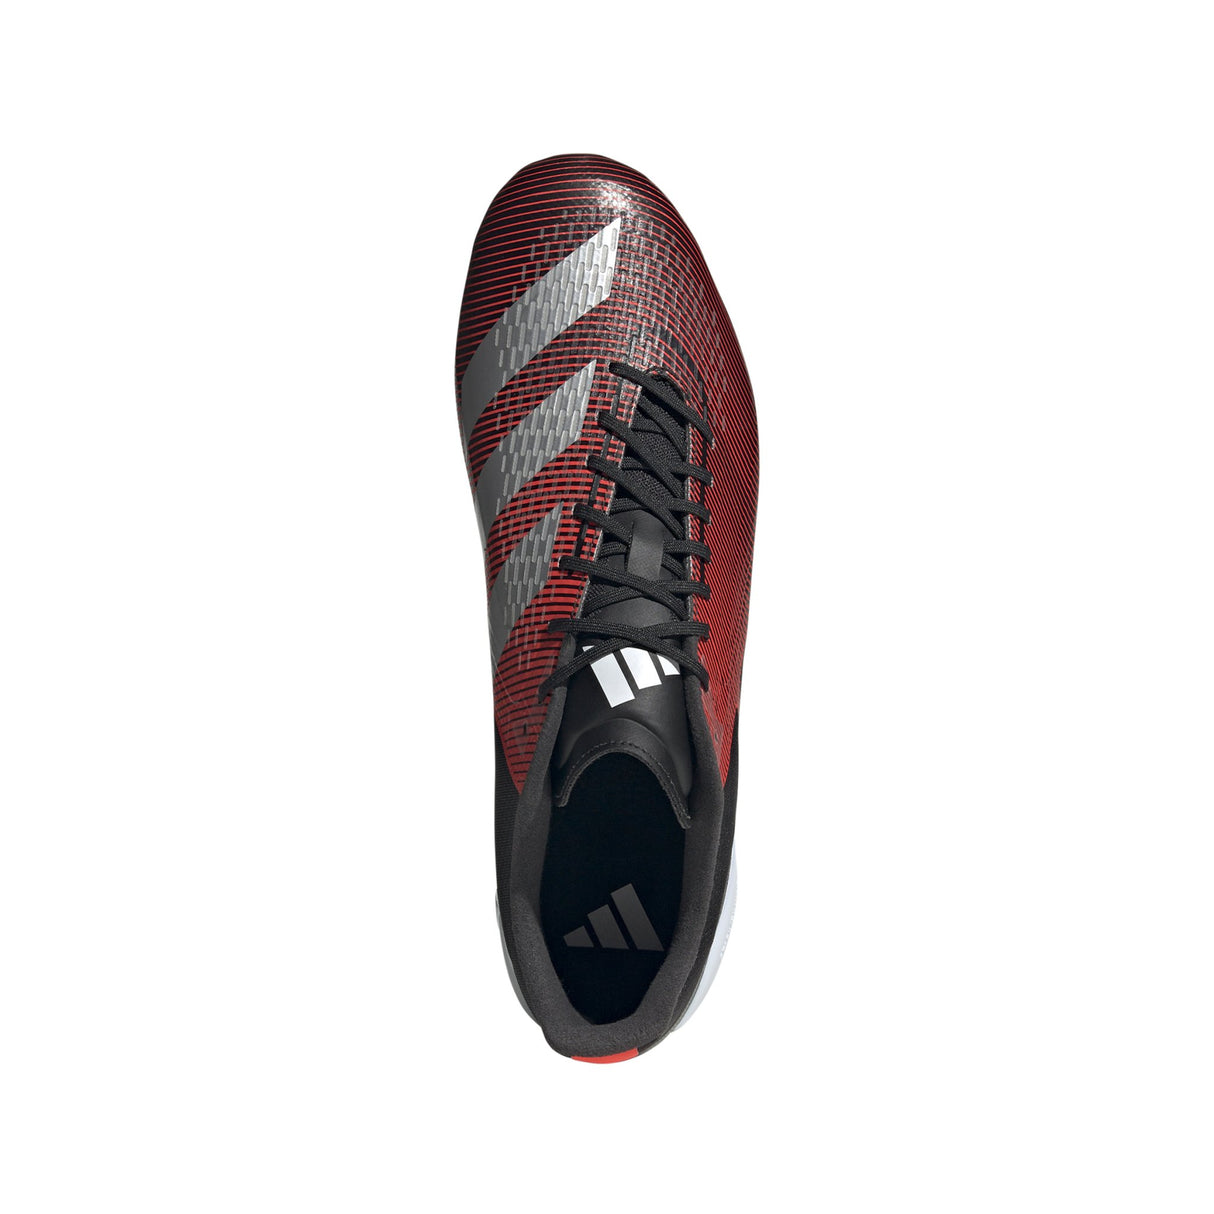 Adidas Adizero RS15 Ultimate (SG) Rugby Boots |Boots | Adidas | Absolute Rugby